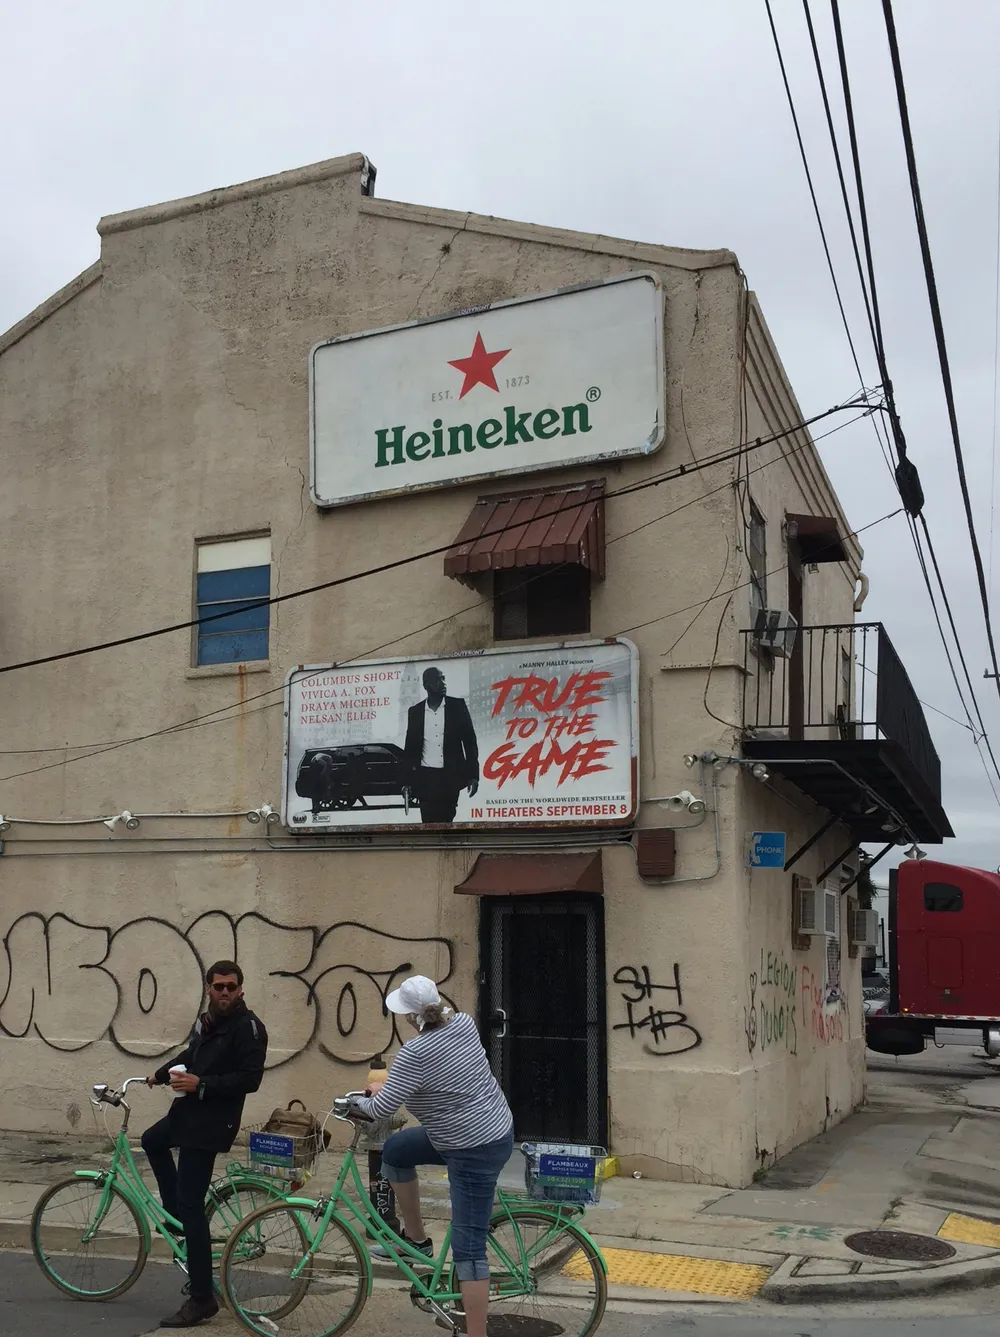 Two individuals on green bicycles are stopped at a corner in front of a building with a Heineken beer sign and a movie poster for True to the Game